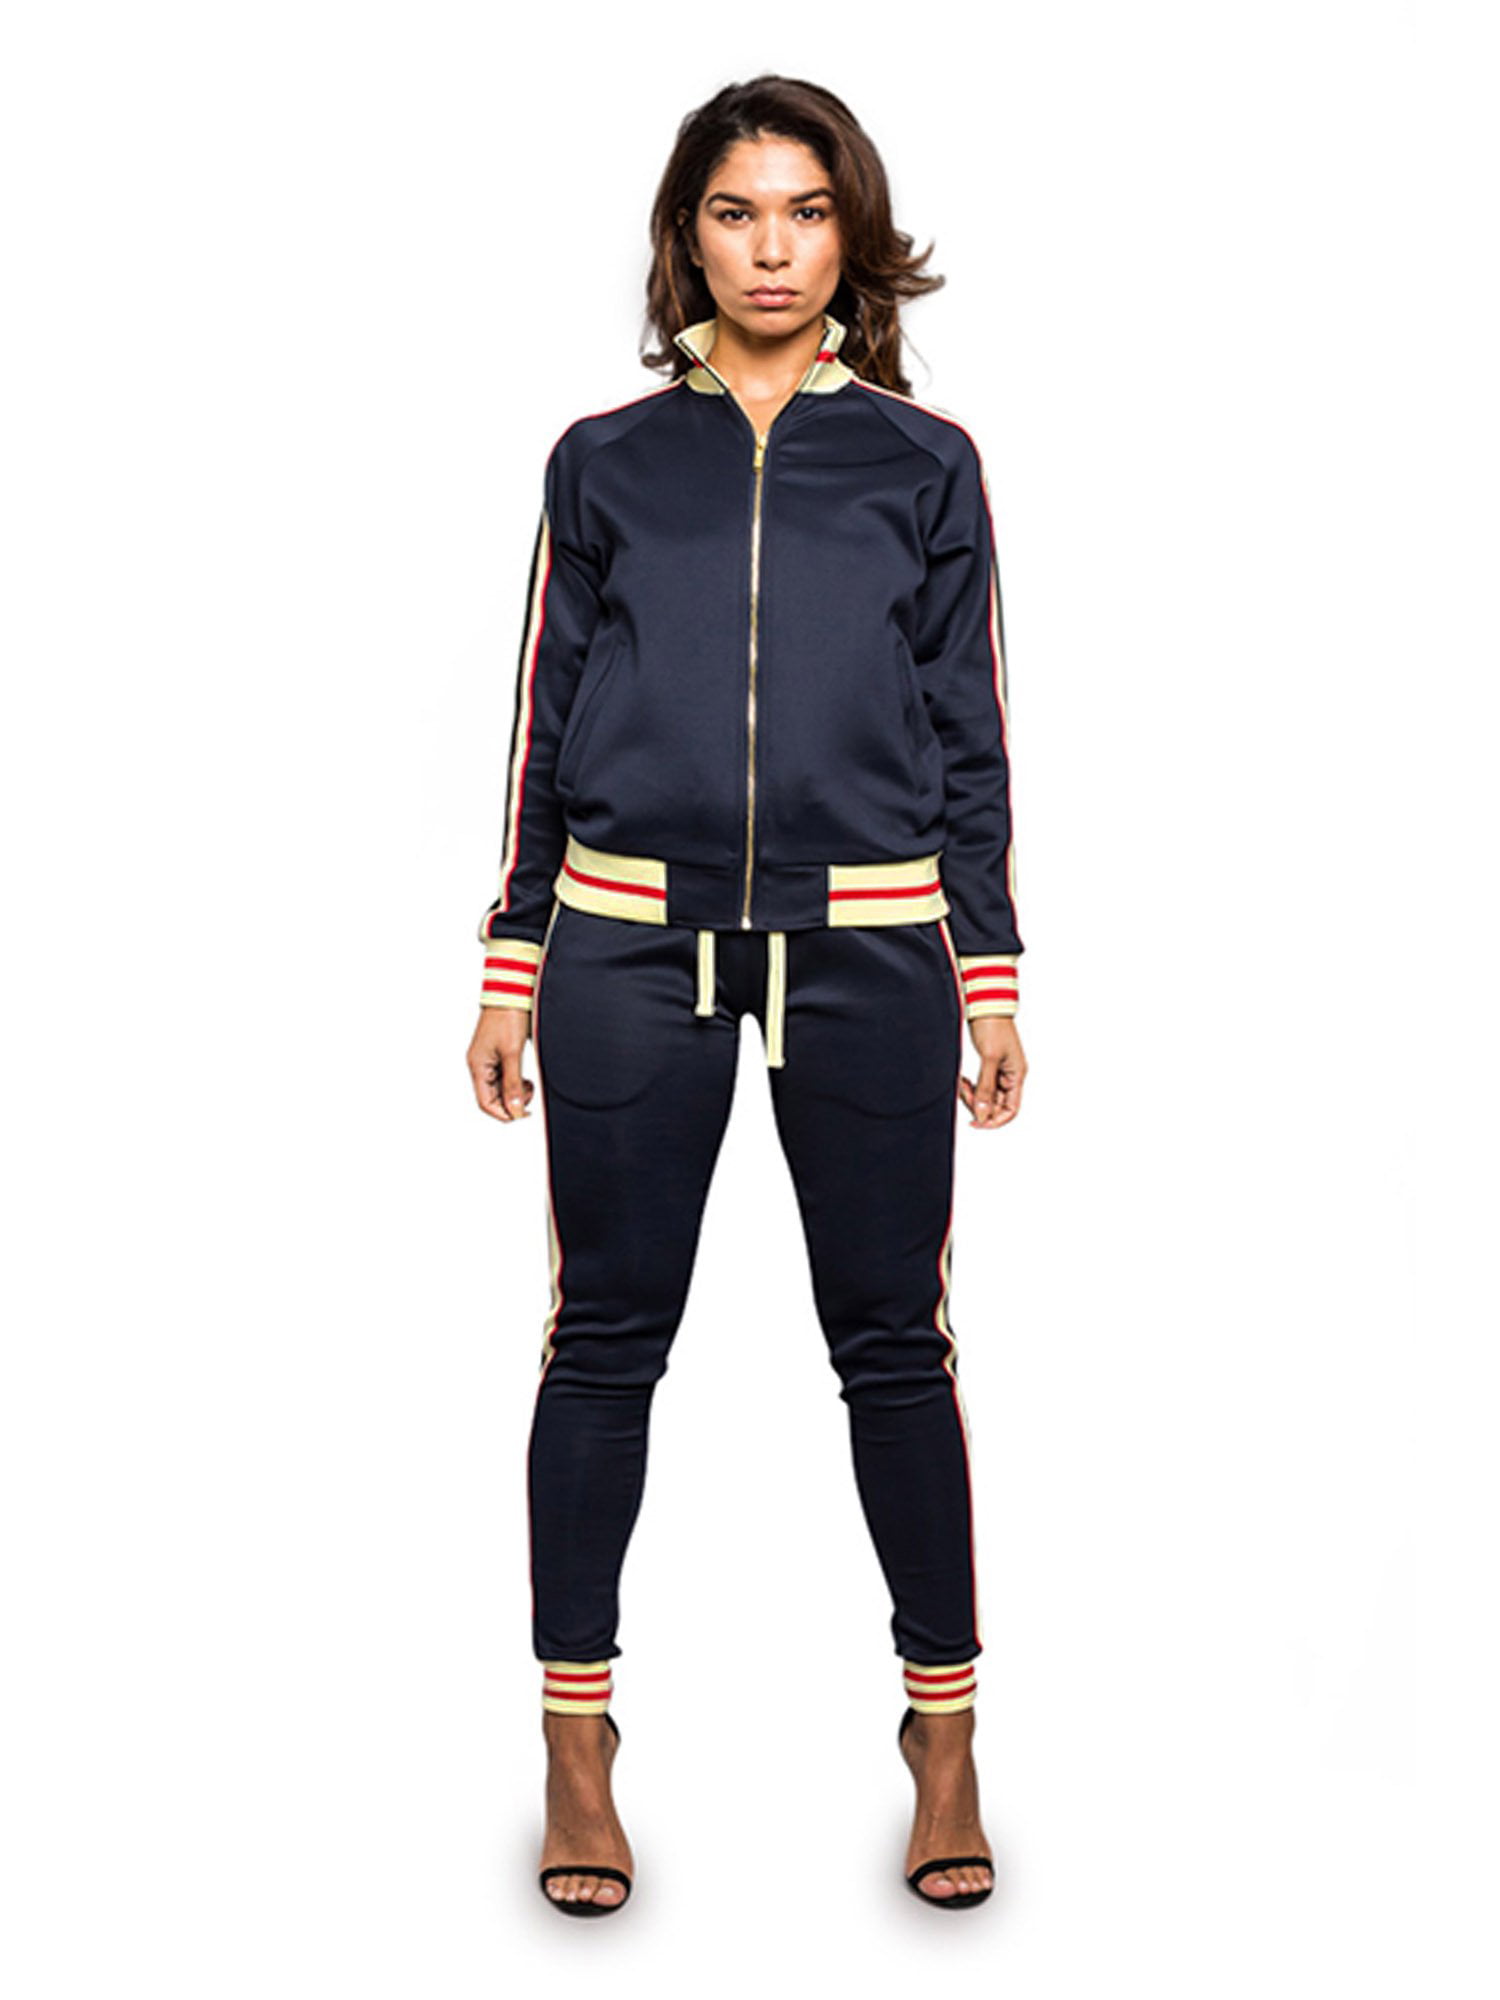 Victorious Womens 2 Piece Tracksuit Set Long Sleeve Sweatshirts and Sweat Pants 